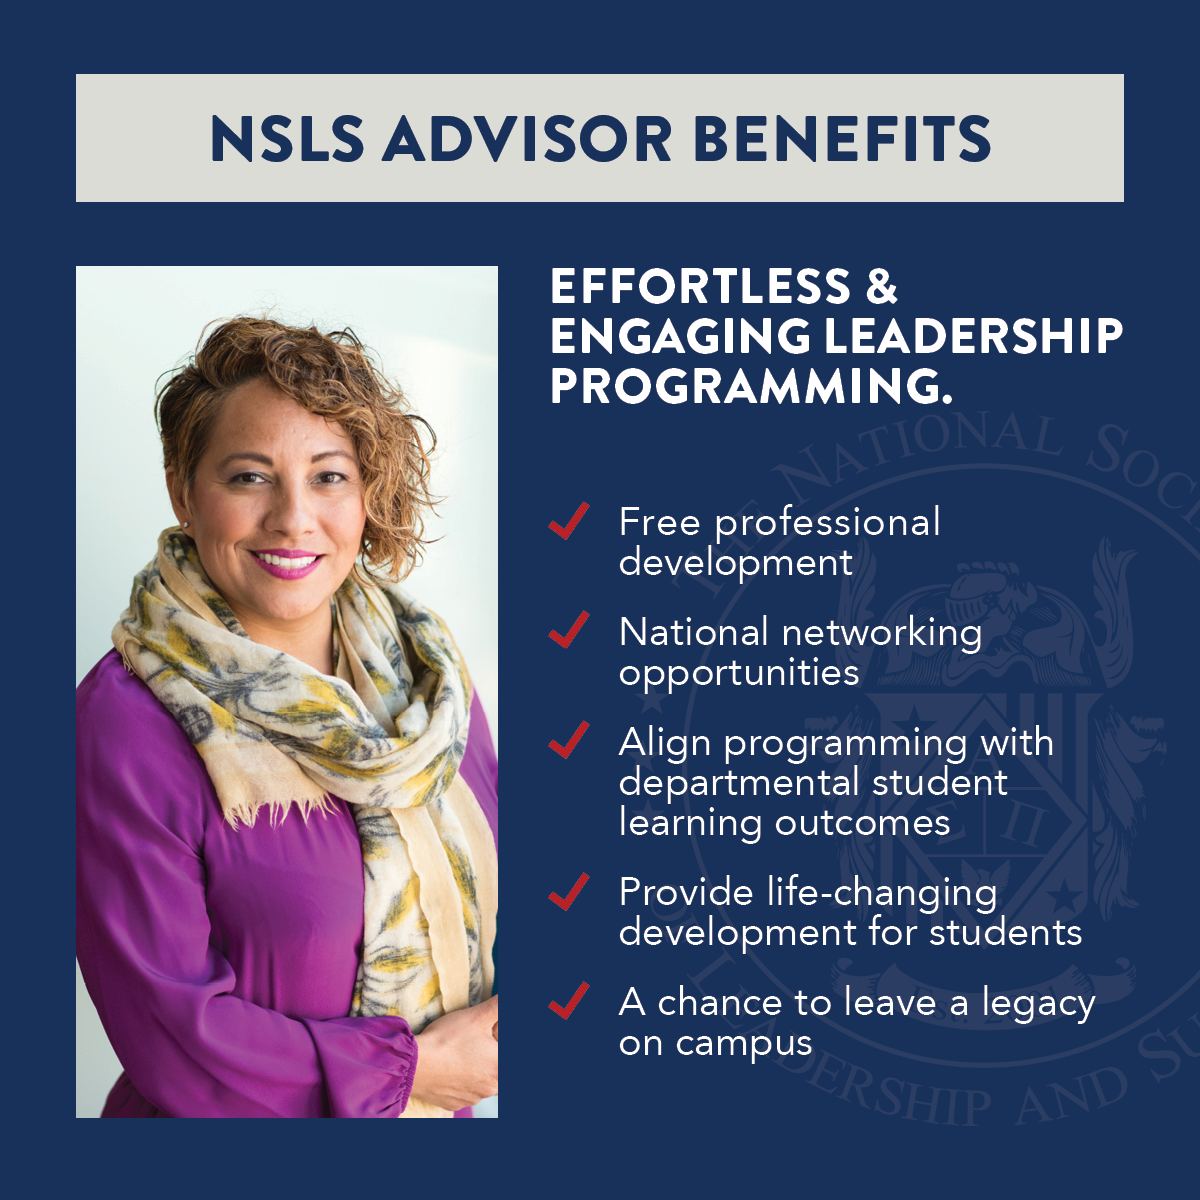 On the left side, a woman in purple with a floral scarf poses for a portrait. On the right side there’s a list of NSLS advisor benefits, which include: free professional development; national networking opportunities; align programming with departmental student learning outcomes; provide life-changing development for students; a chance to leave a legacy on campus.